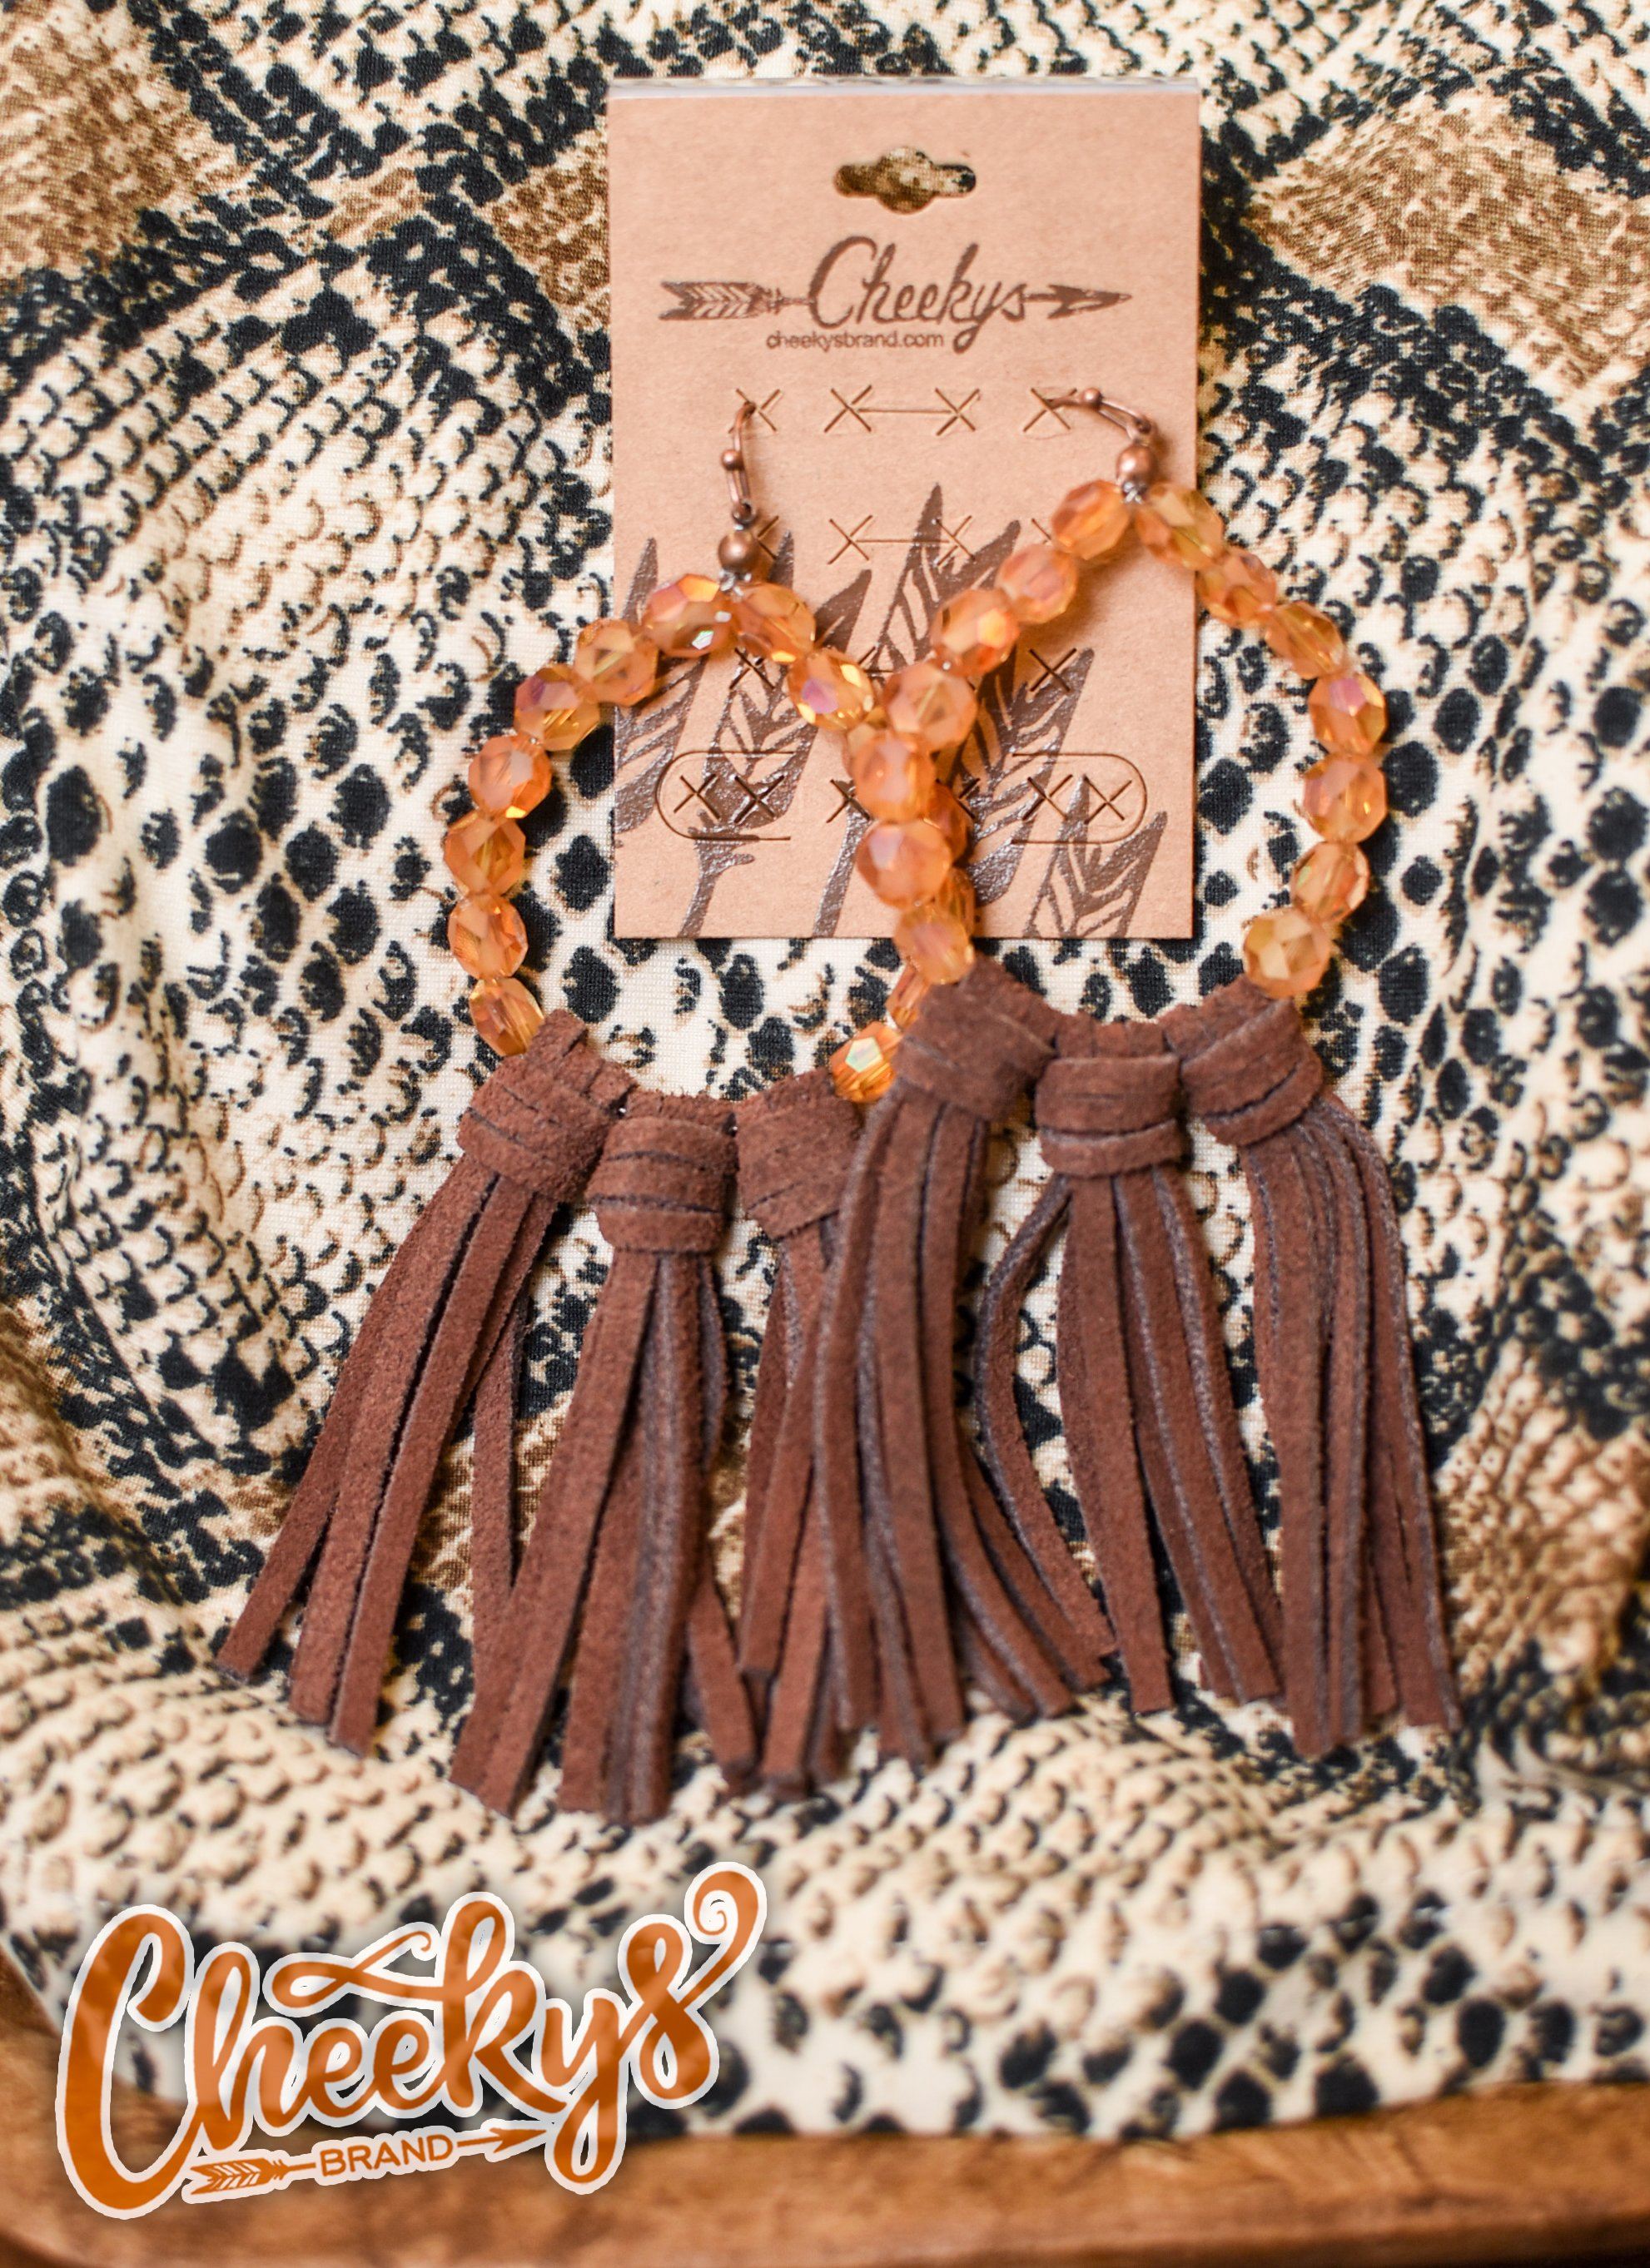 Willa Leather Tassel Earrings with Amber Beads and Brown Tassels Jewelry 18 